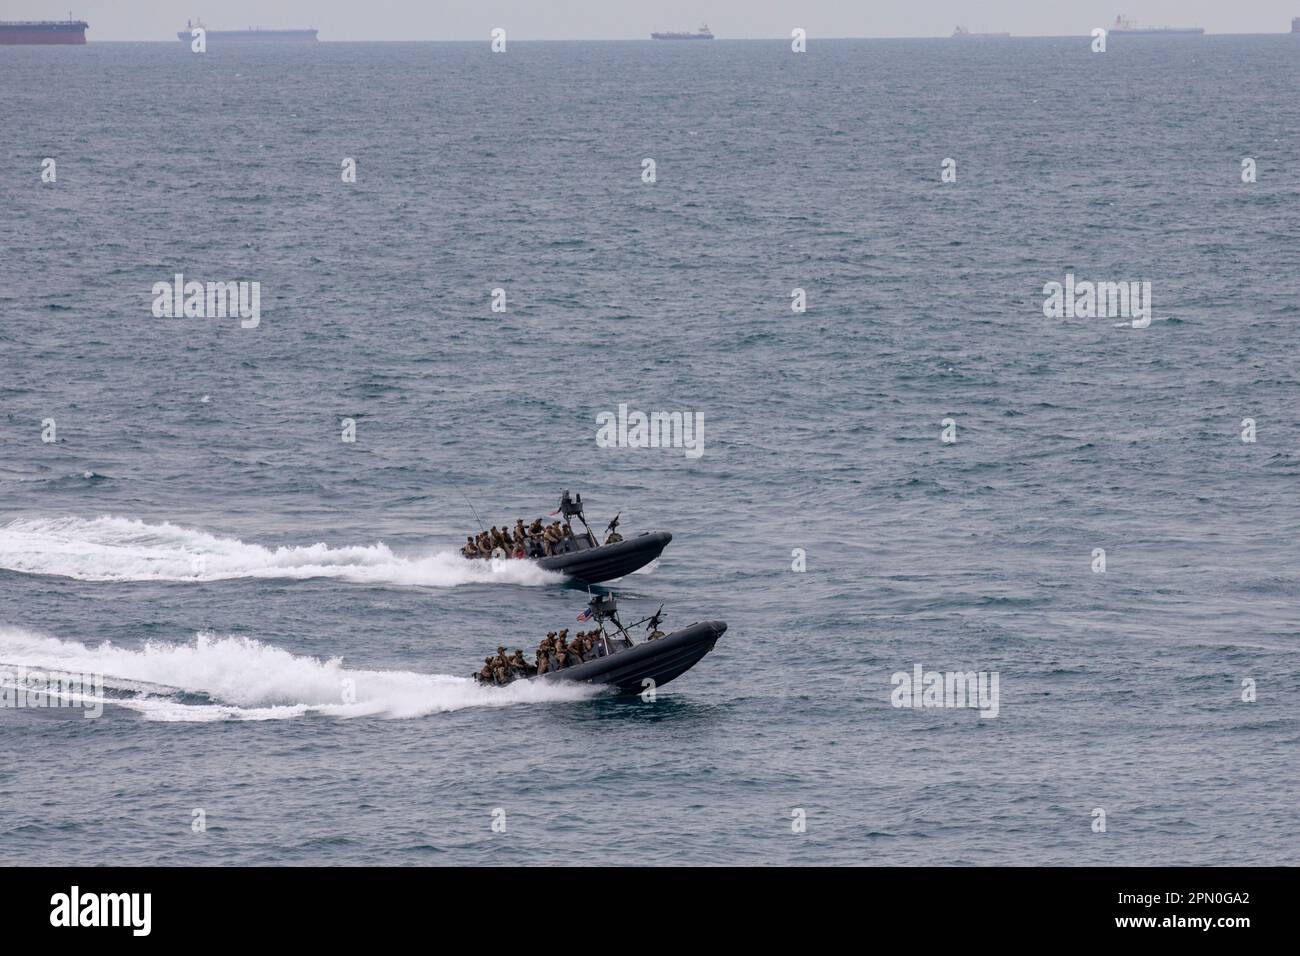 SOUTH CHINA SEA (Jan. 7, 2023) – U.S. Marines, with Maritime Raid Force, 13th Marine Expeditionary Unit, pilot their 11-meter rigid hull inflatable boats towards the objective during a maritime interdiction operation, Jan. 7. A force in readiness, the 13th MEU trains in maritime interdiction operations to rapidly respond to crisis across all domains. 7th Fleet is the U.S. Navy's largest forward-deployed numbered fleet, and routinely interacts and operates with Allies and partners in preserving a free and open Indo-Pacific region. (U.S. Marine Corps Photo by Sgt. Brendan Custer) Stock Photo